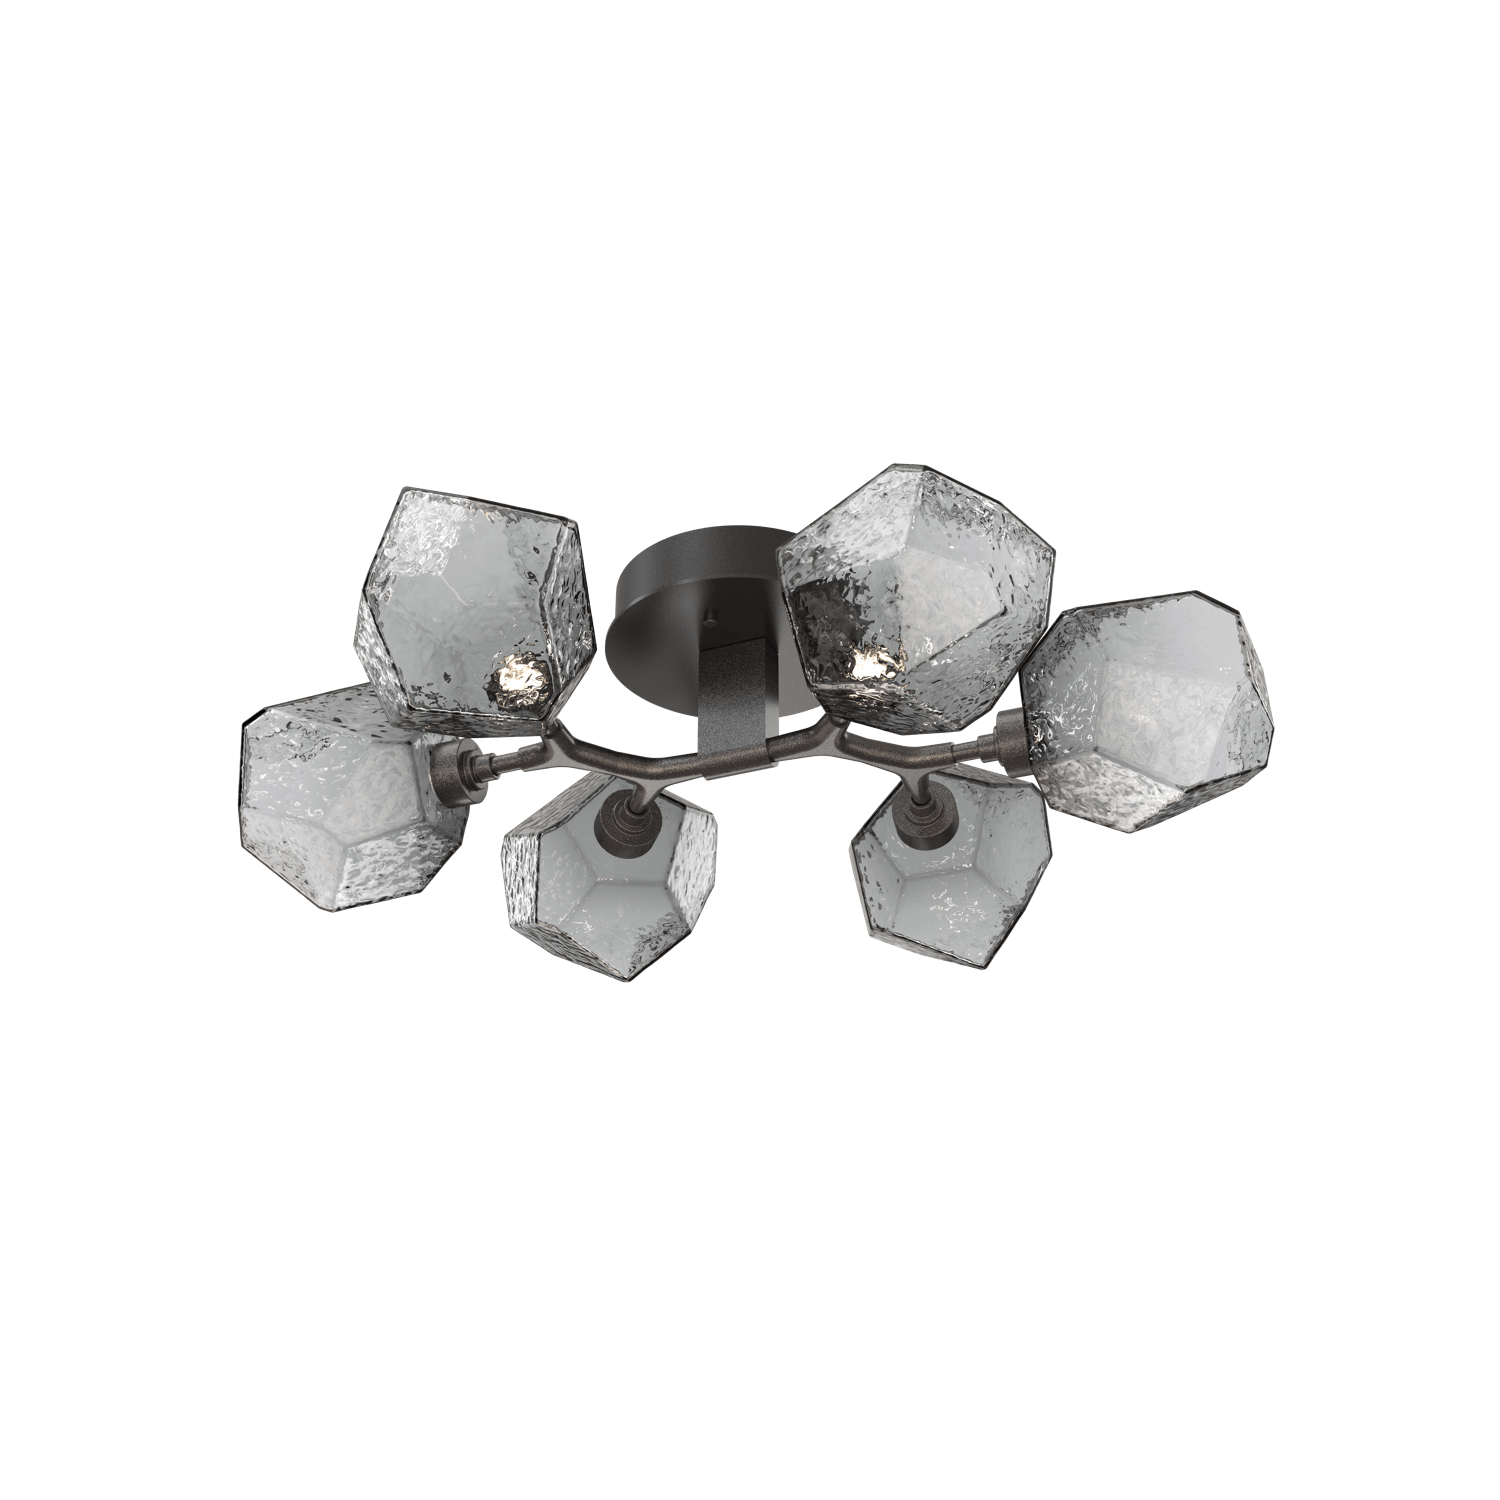 CLB0039-01-GP-S-Hammerton-Studio-Gem-6-light-organic-flush-mount-light-with-graphite-finish-and-smoke-blown-glass-shades-and-LED-lamping